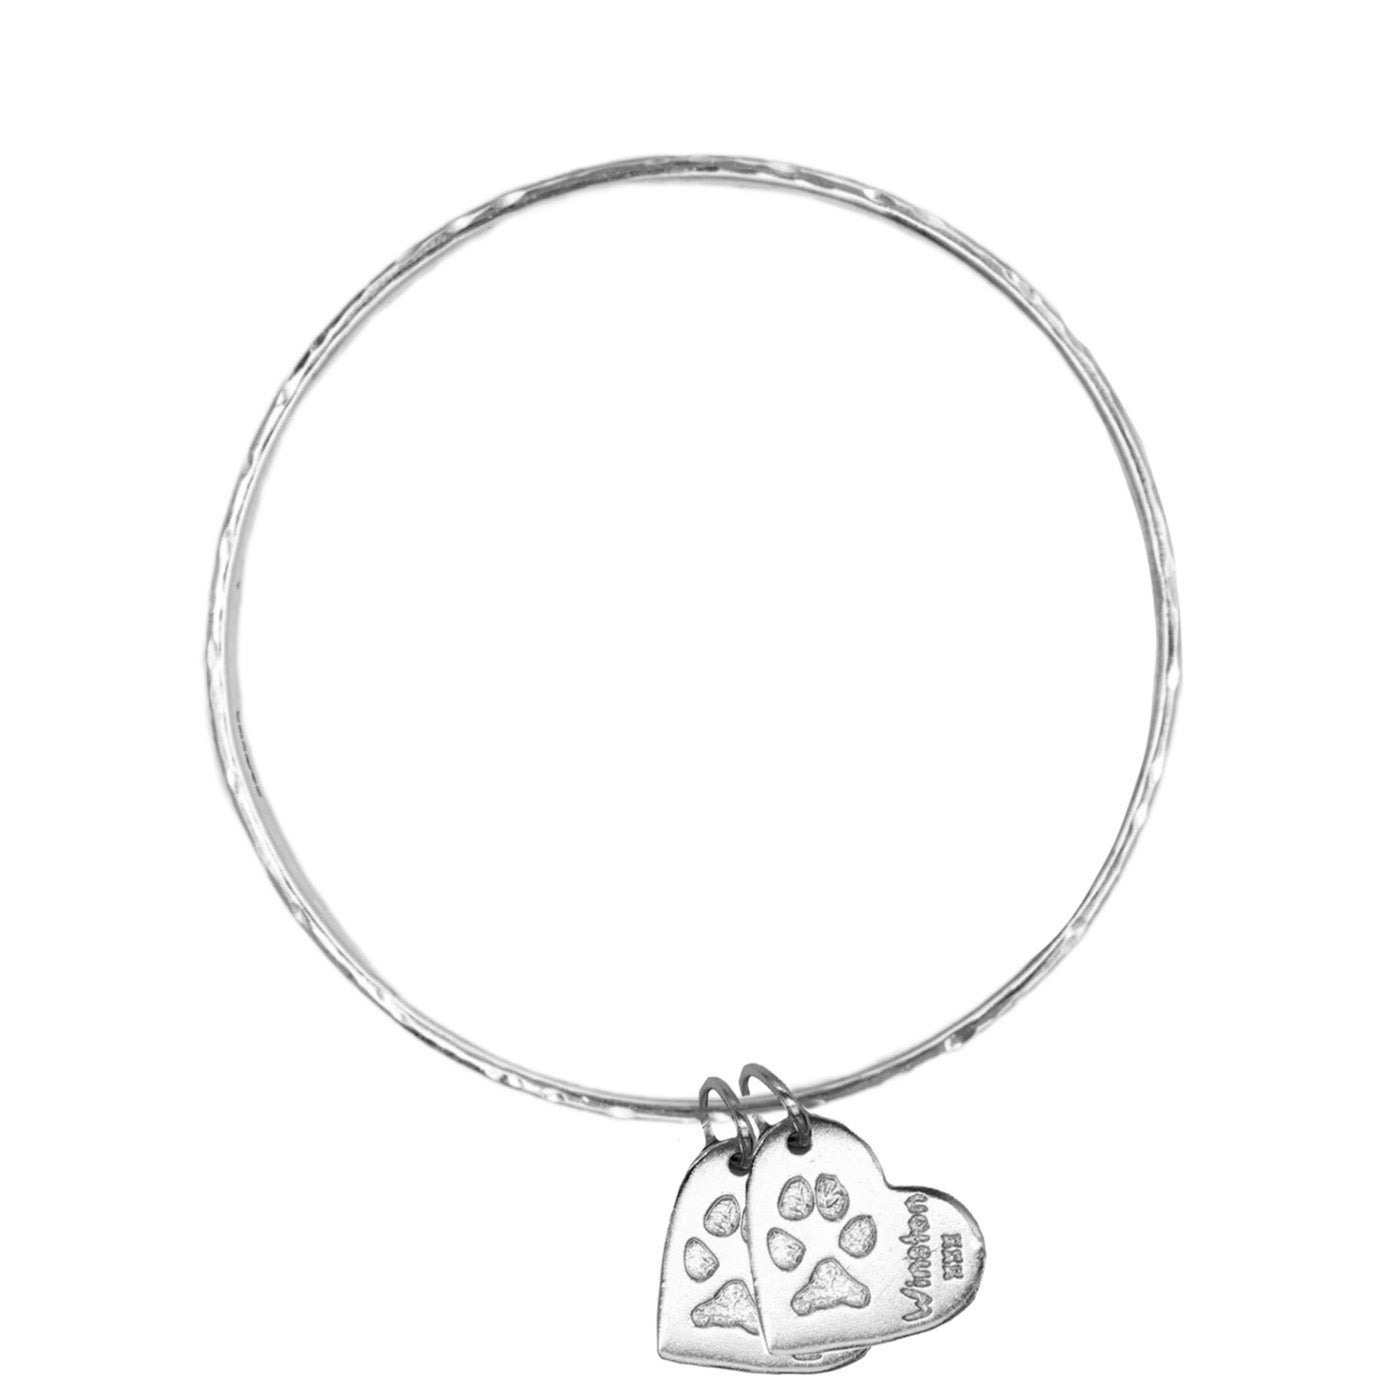 Belle & Bee Midi bangle with 2 paw print charms